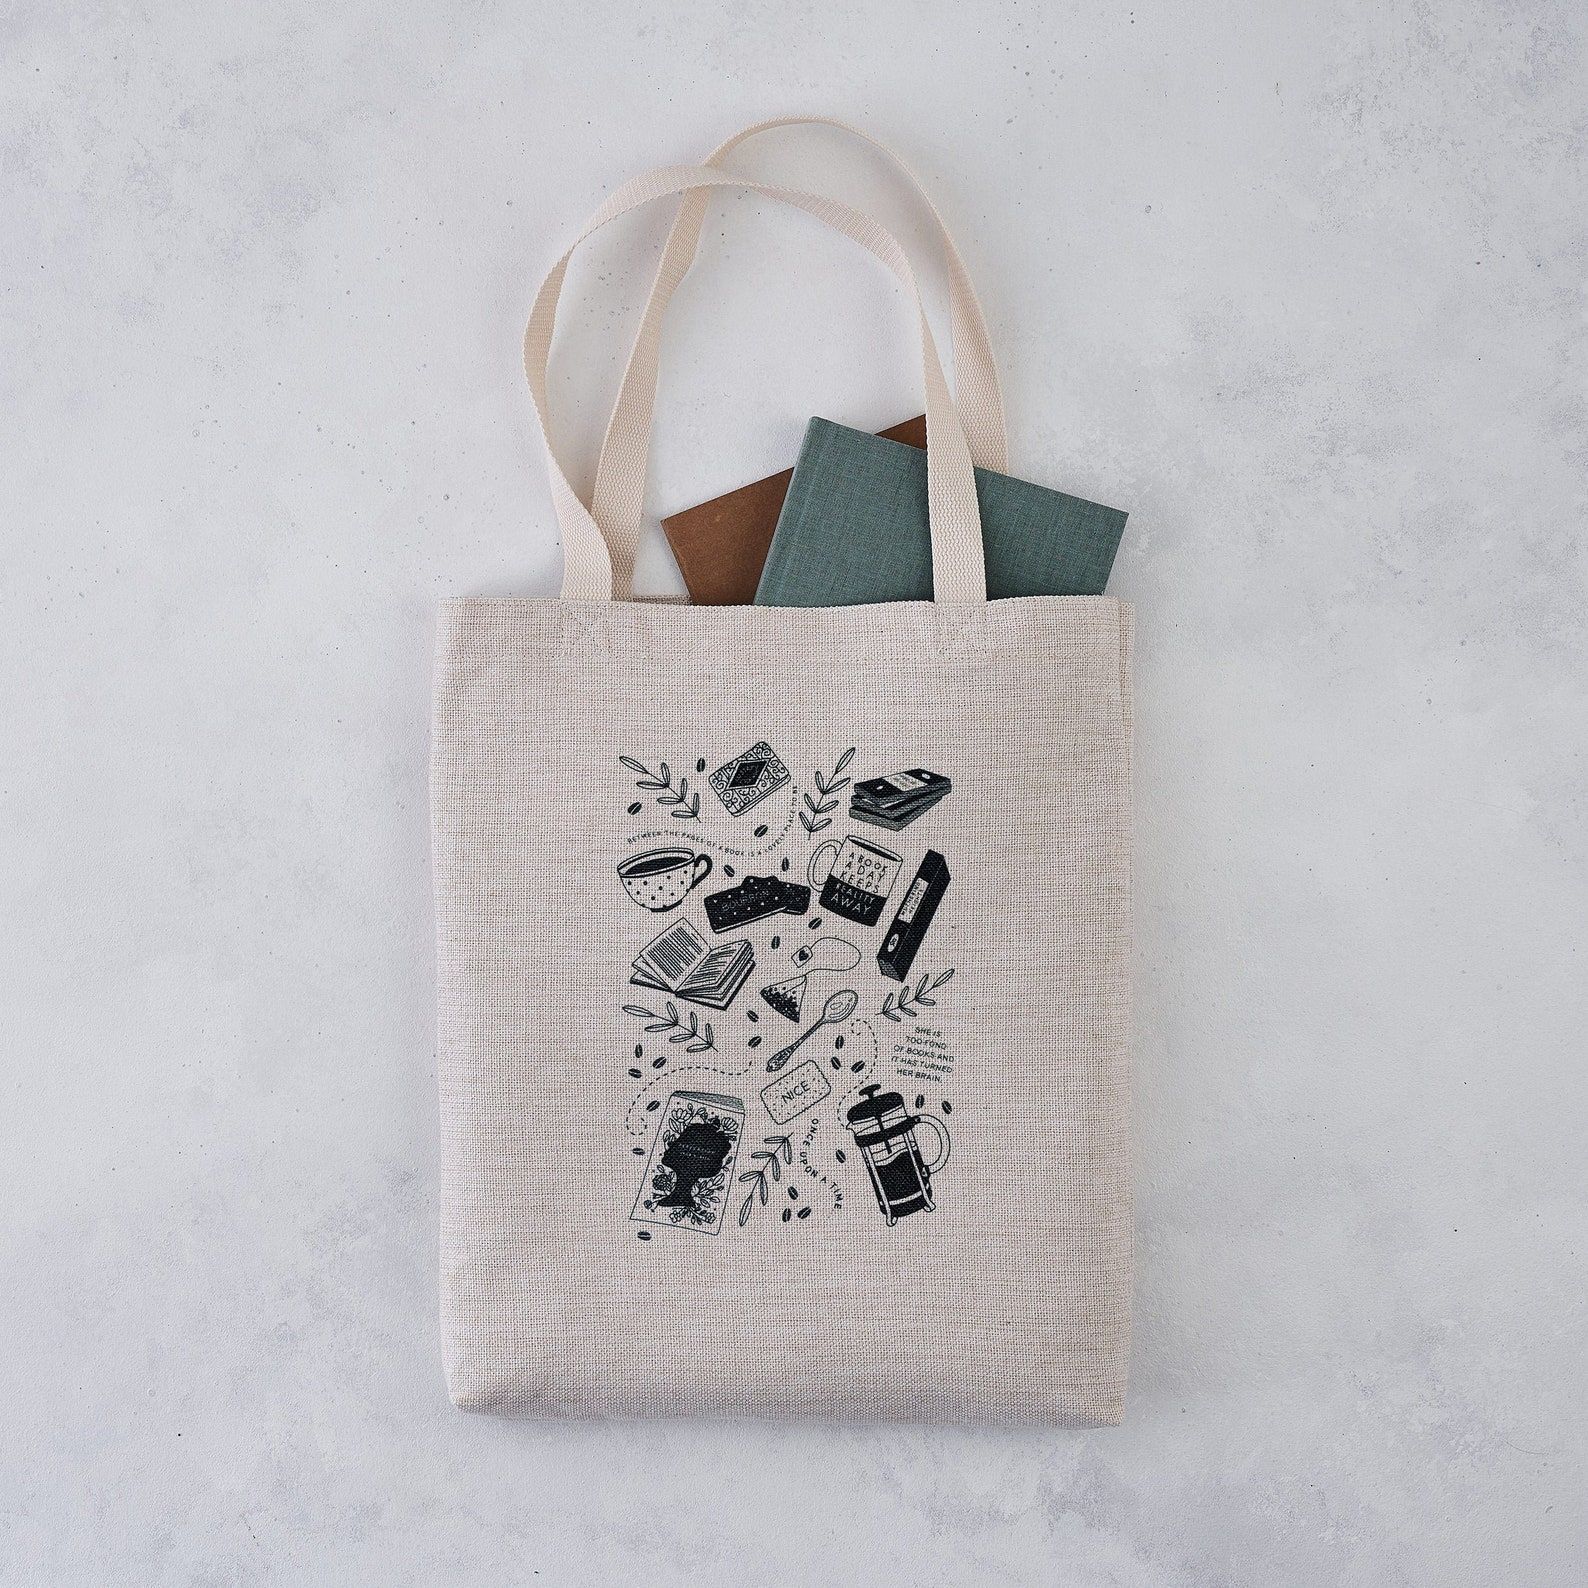 Cozy reader tote from etsy